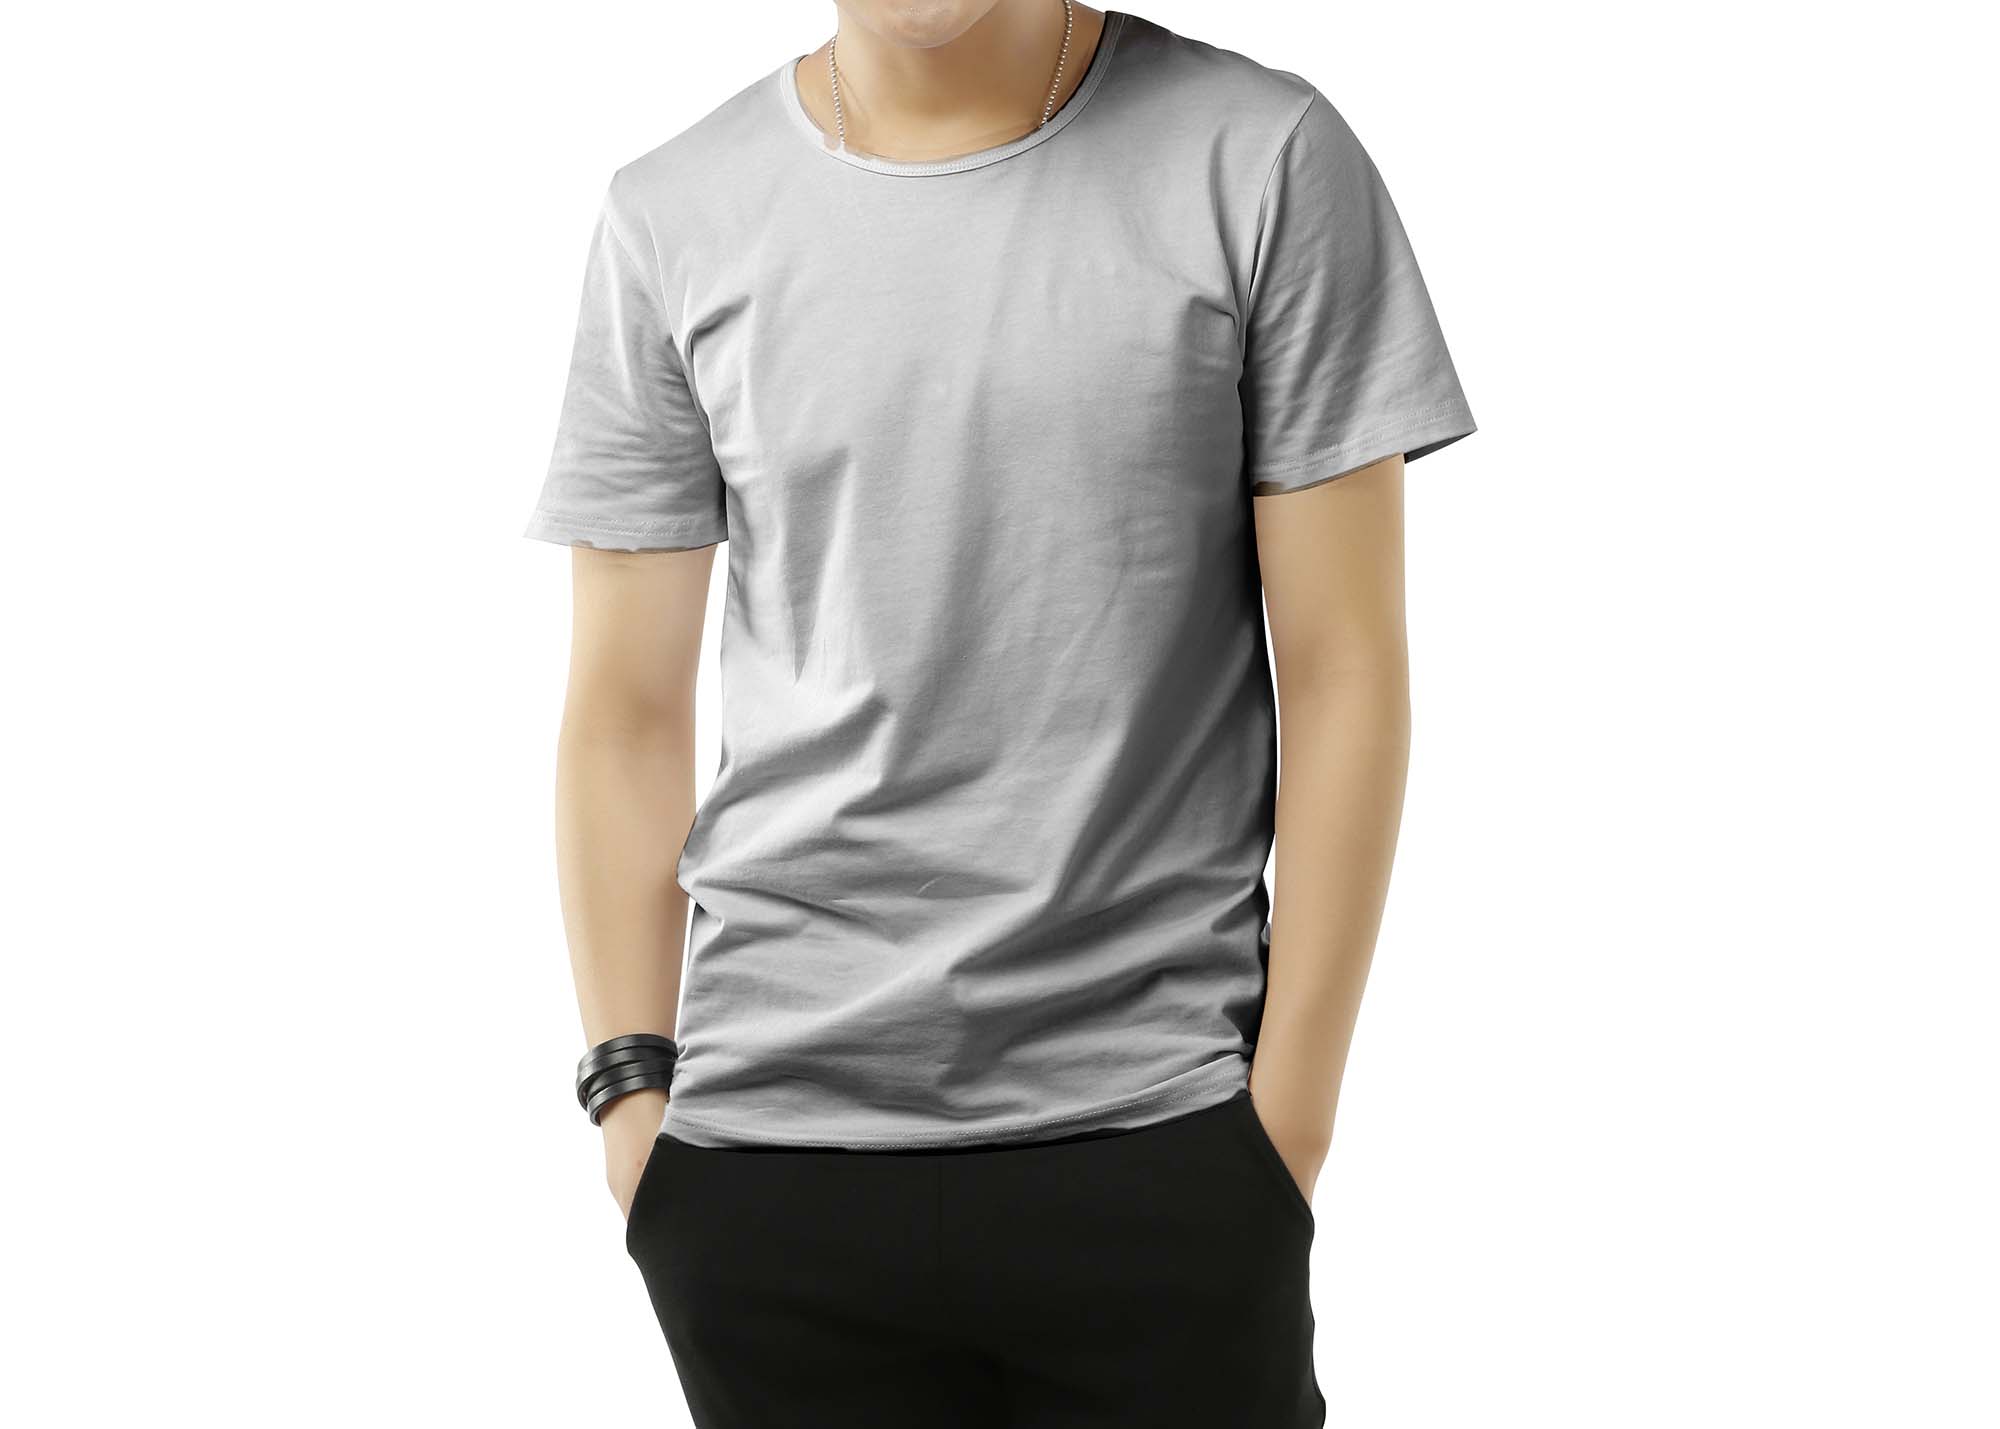 Download Round Neck Men T-Shirt PSD Mockup (Free) by